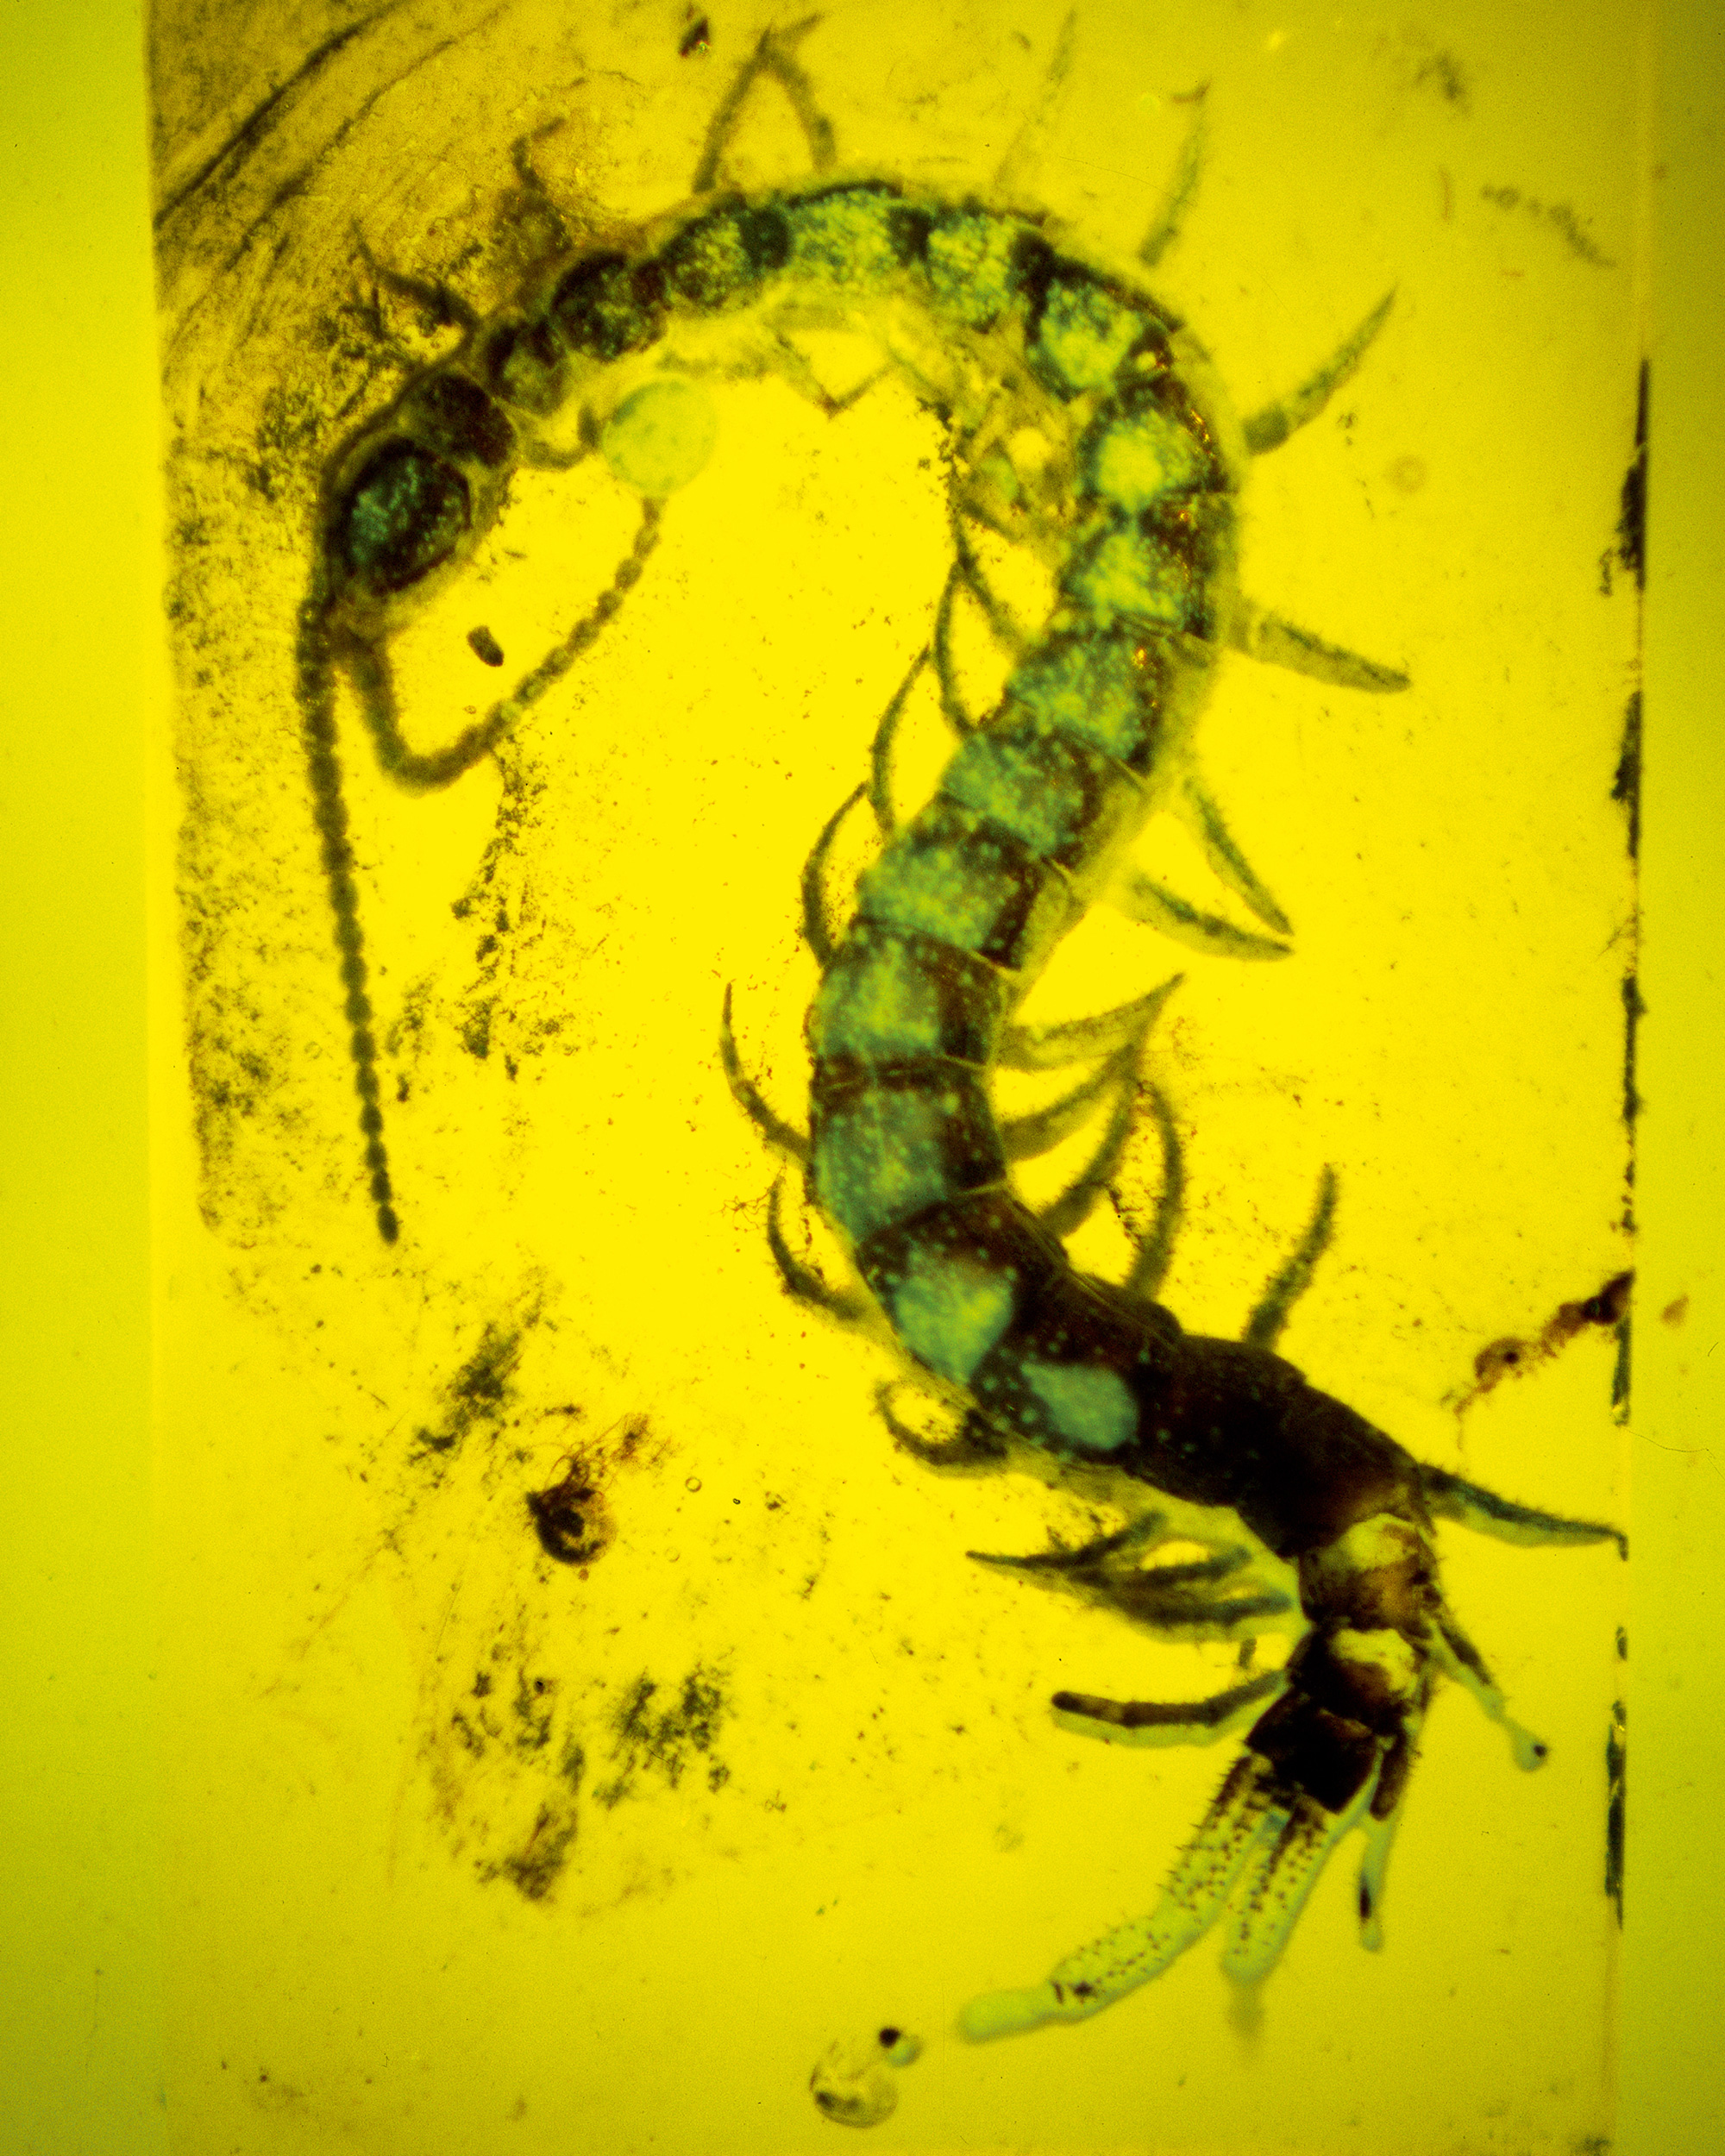 A centipede preserved in Baltic amber dating from the Upper Eocene subepoch. Courtesy Natural History Museum, London.